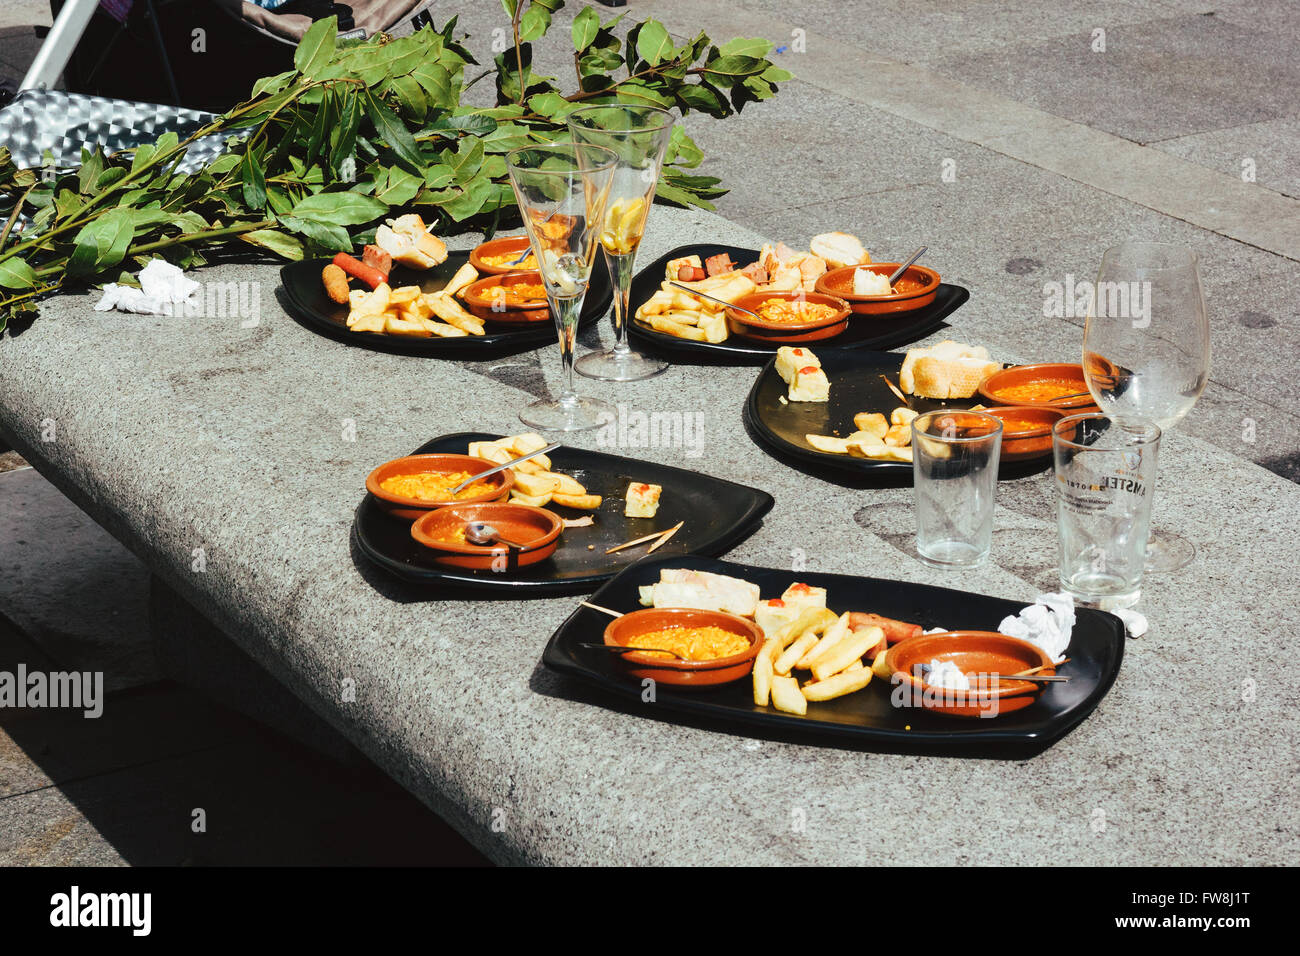 Several trays with food left on a stone bench. Tapas served in clay plates and green leaves in the background. Empty glasses Stock Photo